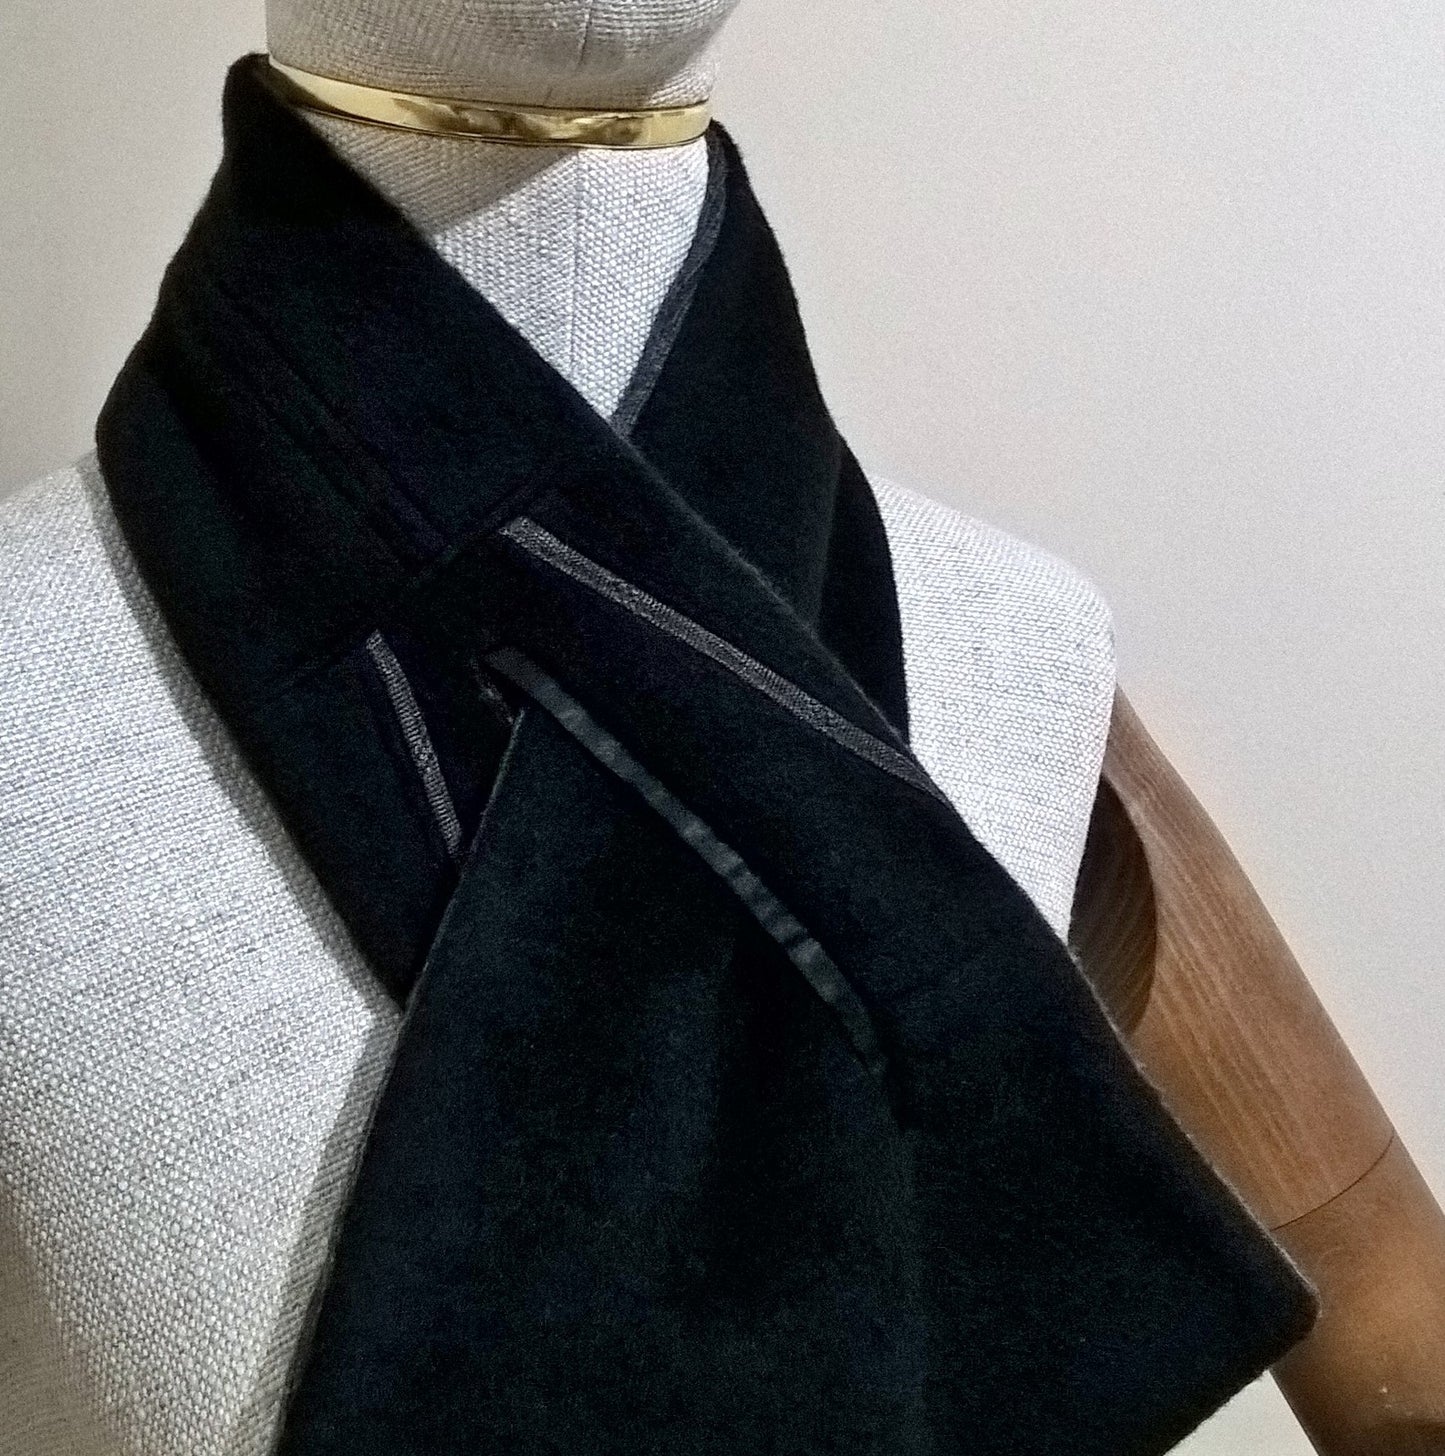 Black cashmere keyhole scarf up-cycled from a coat